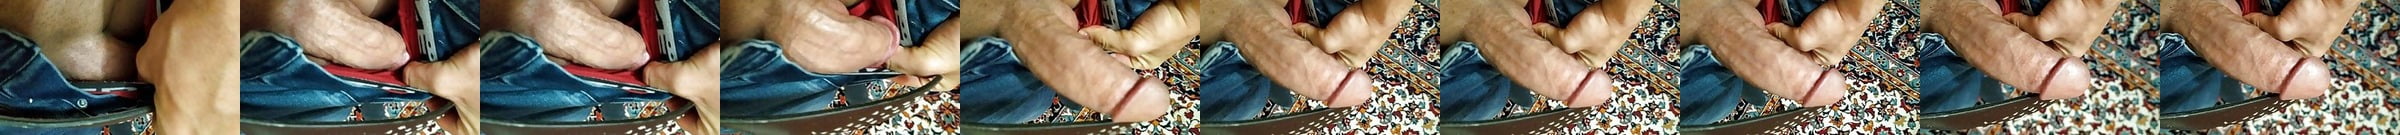 Fat Big Cock On Hairy Turkish Hunk On Cam Free Gay Porn